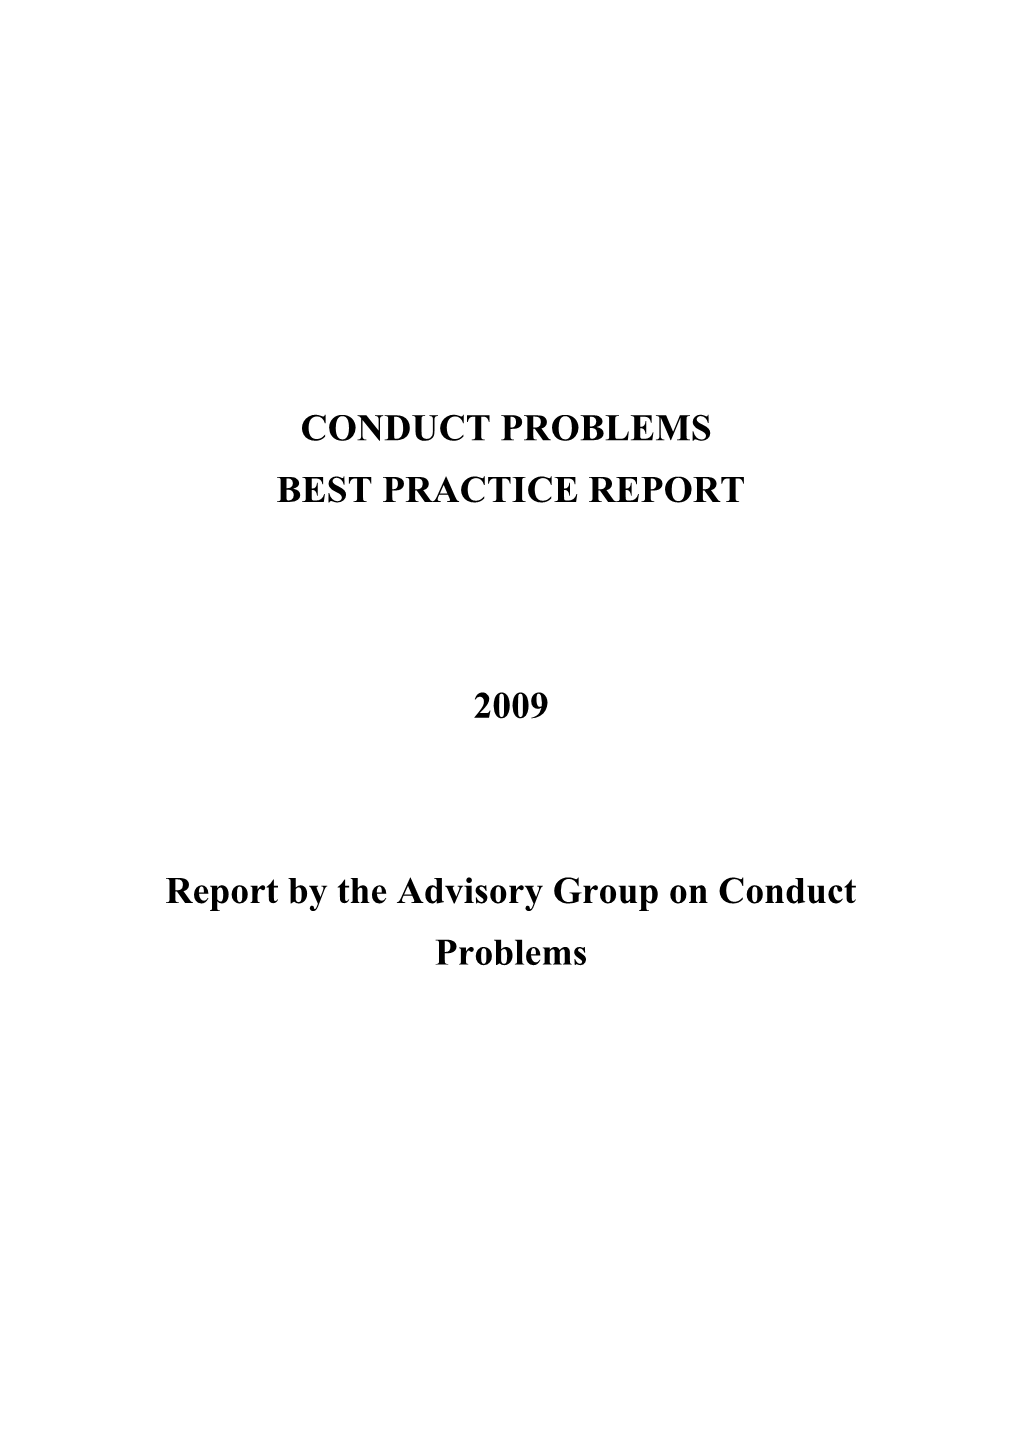 Report by the Advisory Group on Conduct Problems